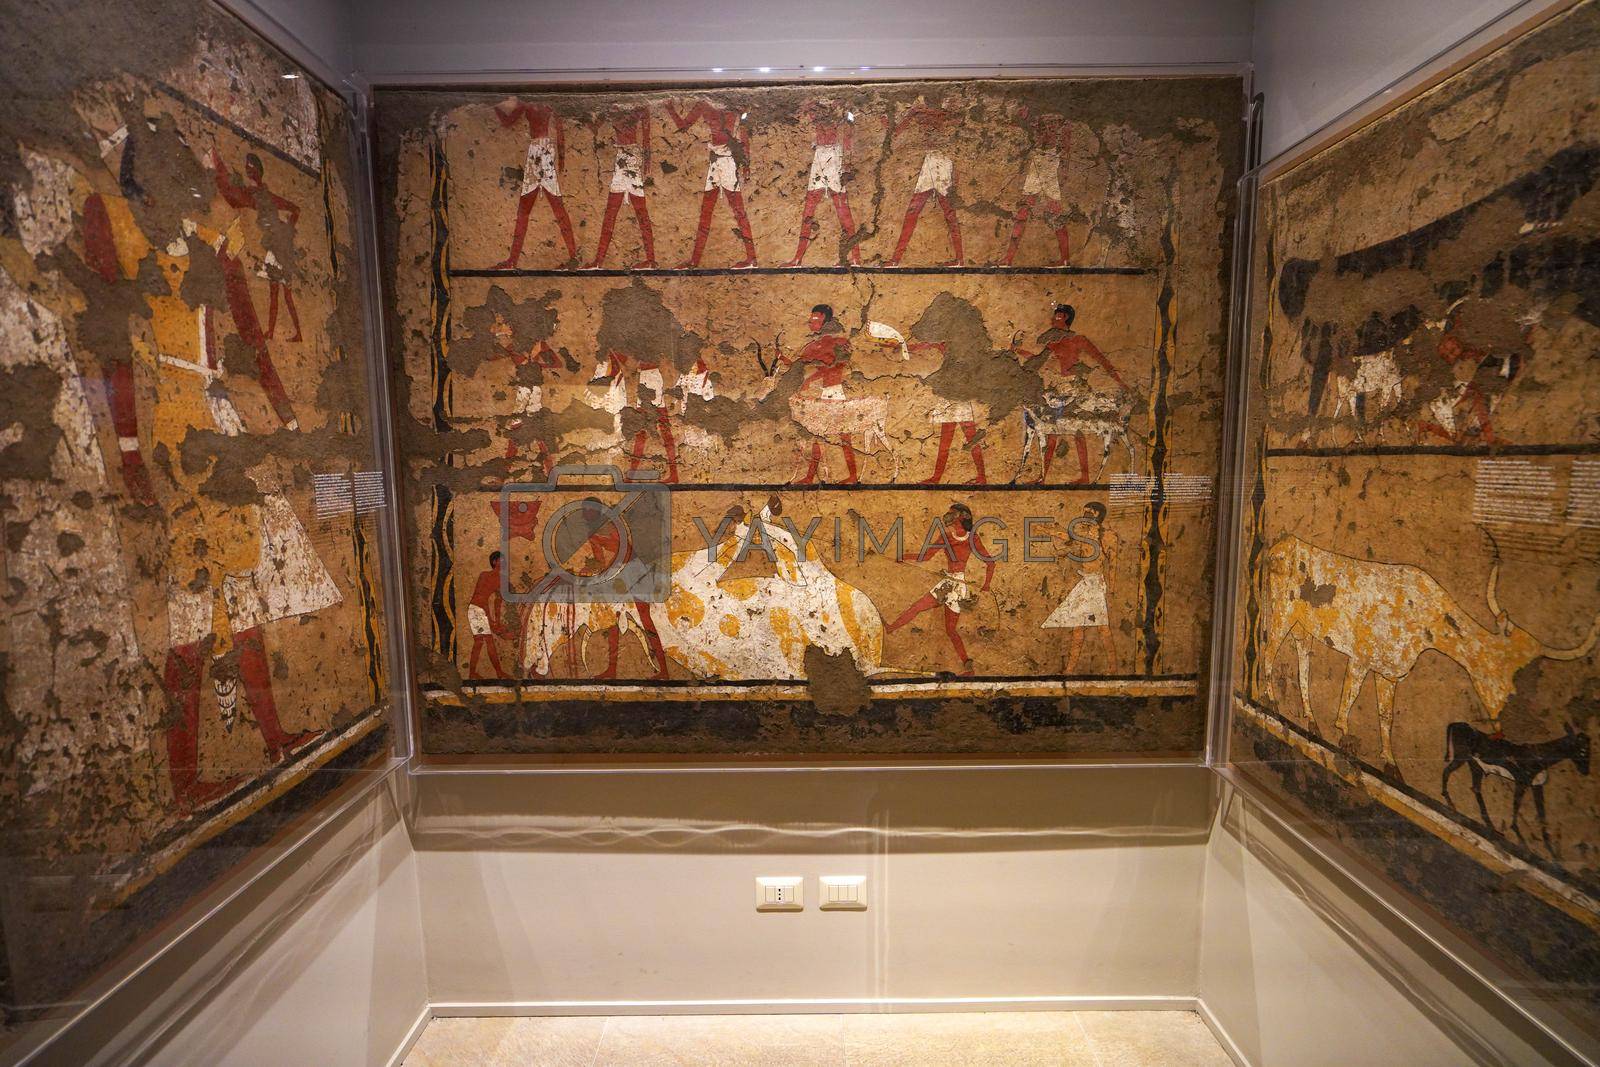 TURIN, ITALY - AUGUST 19, 2021: murals and paintings during Egyptian civilization, Egyptian Museum of Turin, Italy